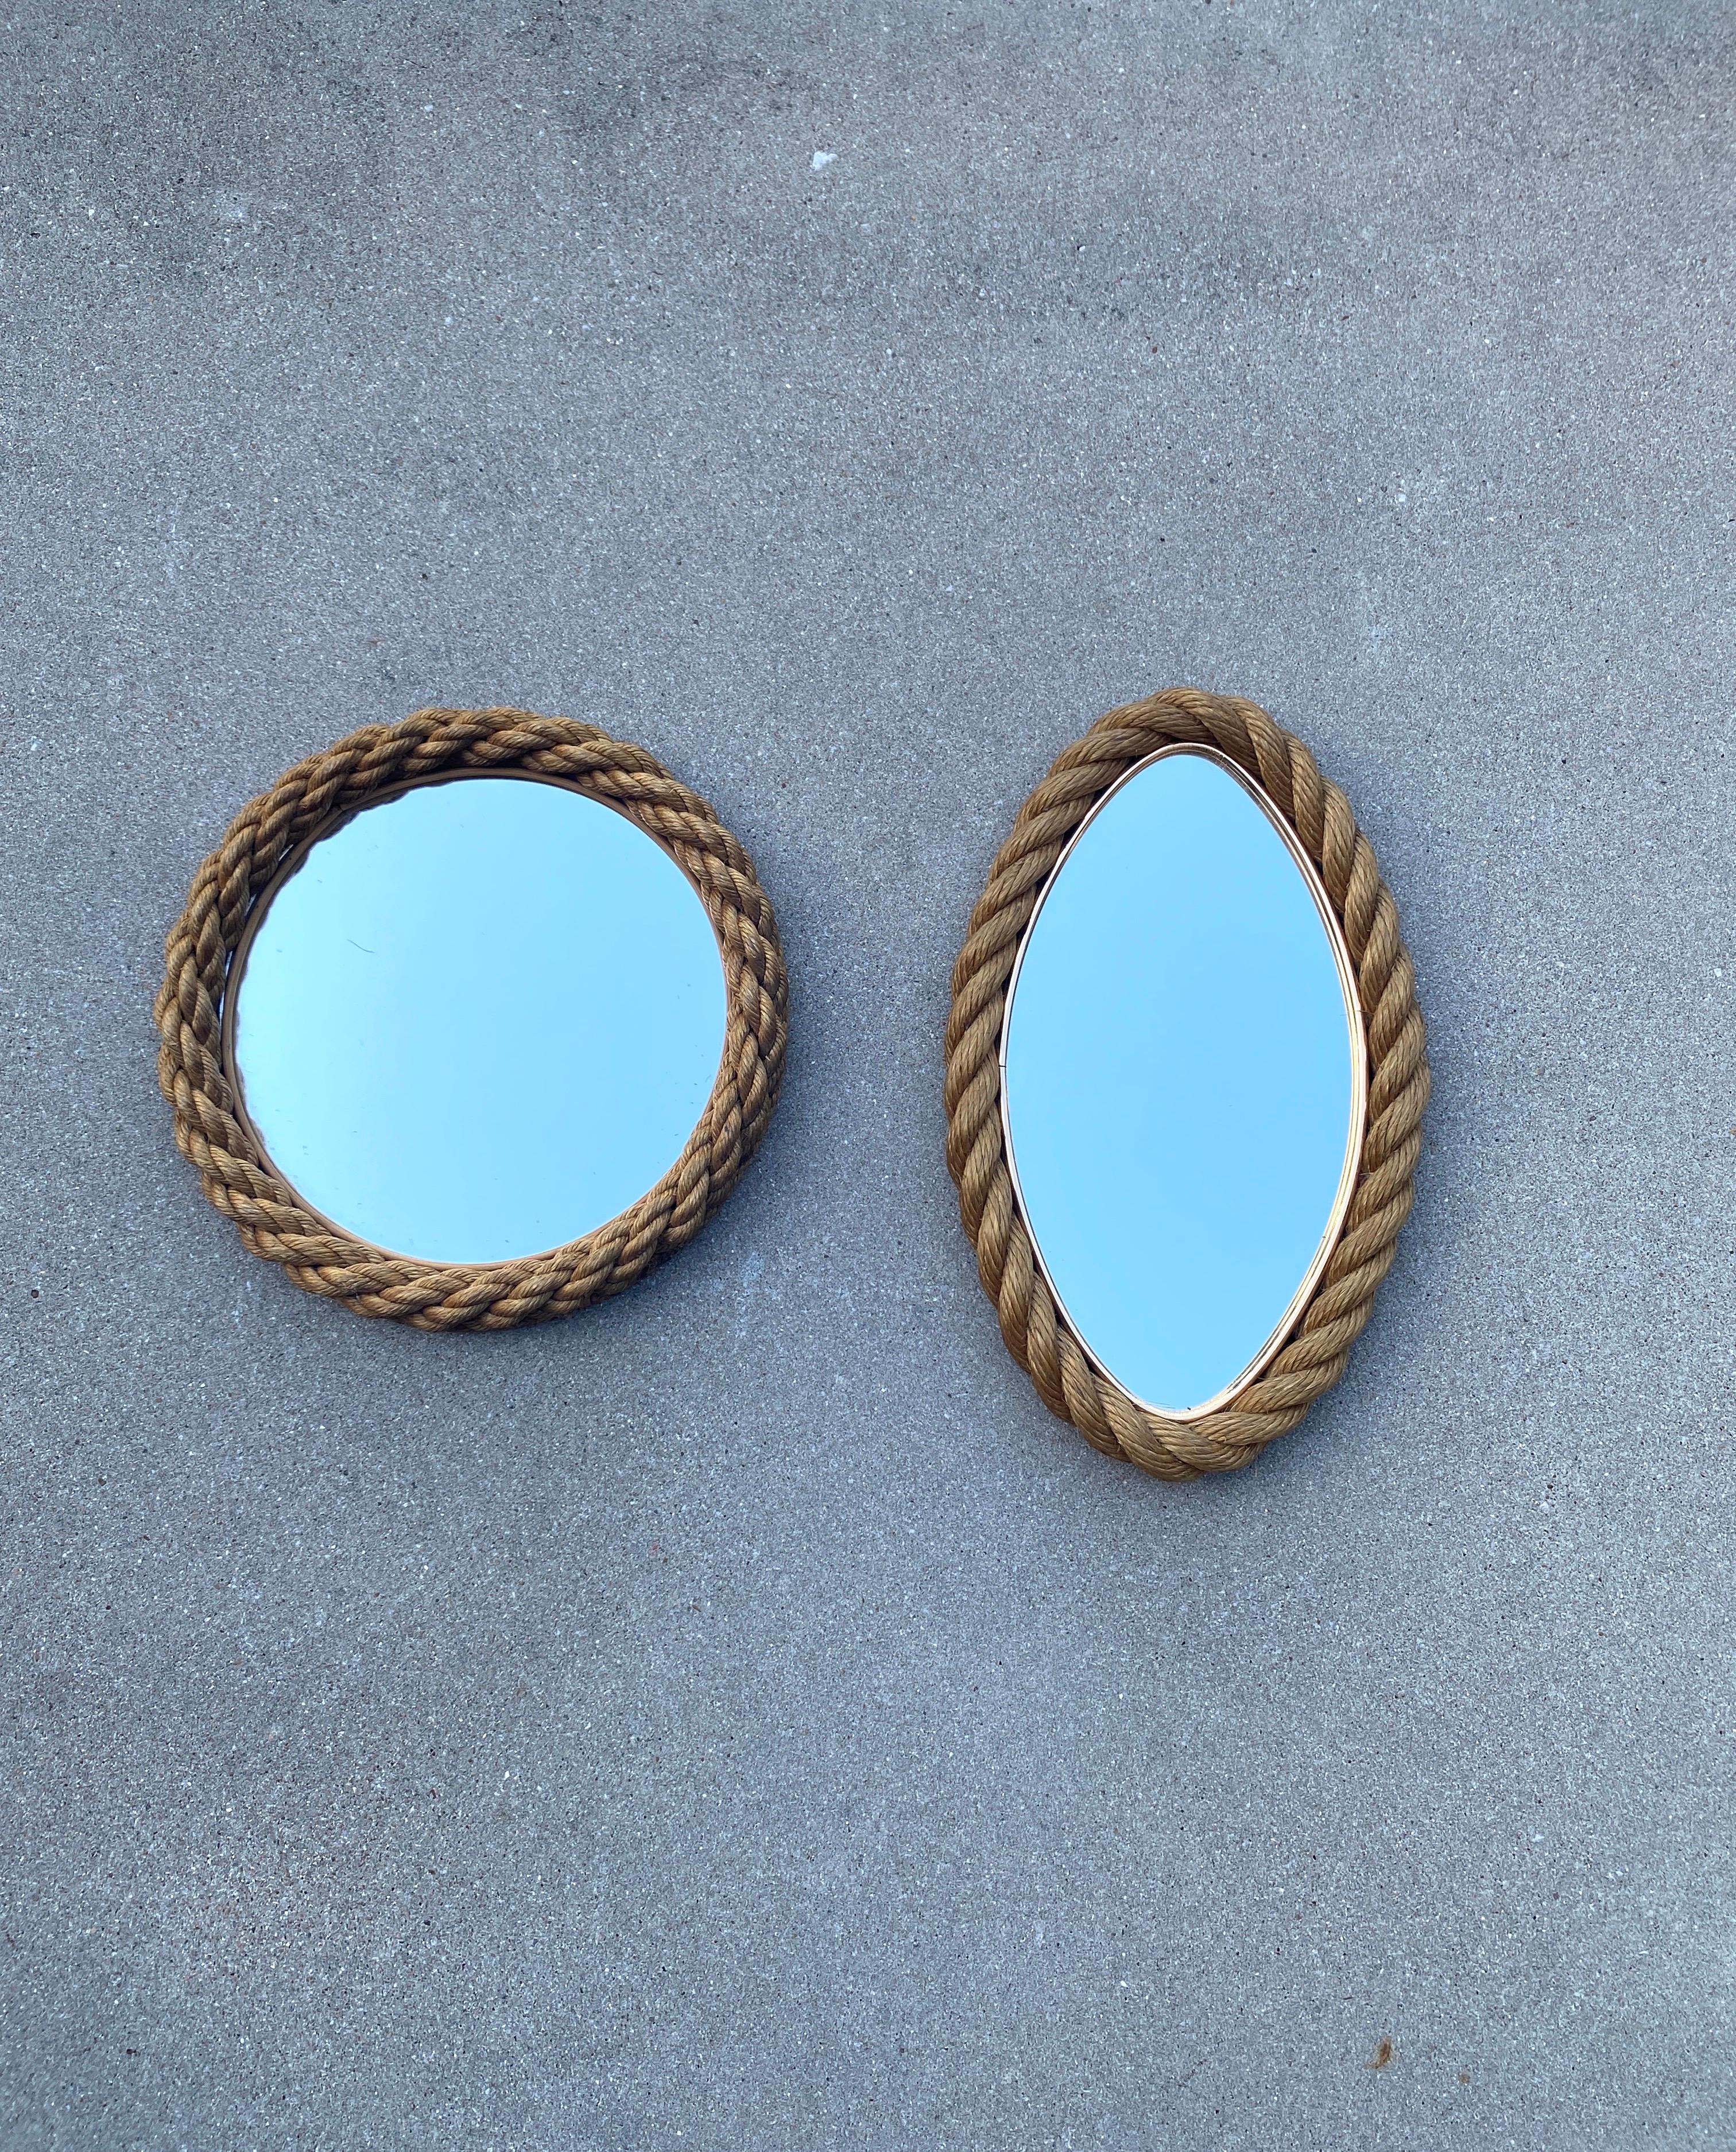 Mid-Century Rope Oval Mirror Adrien Audoux & Frida Minet In Good Condition For Sale In Austin, TX